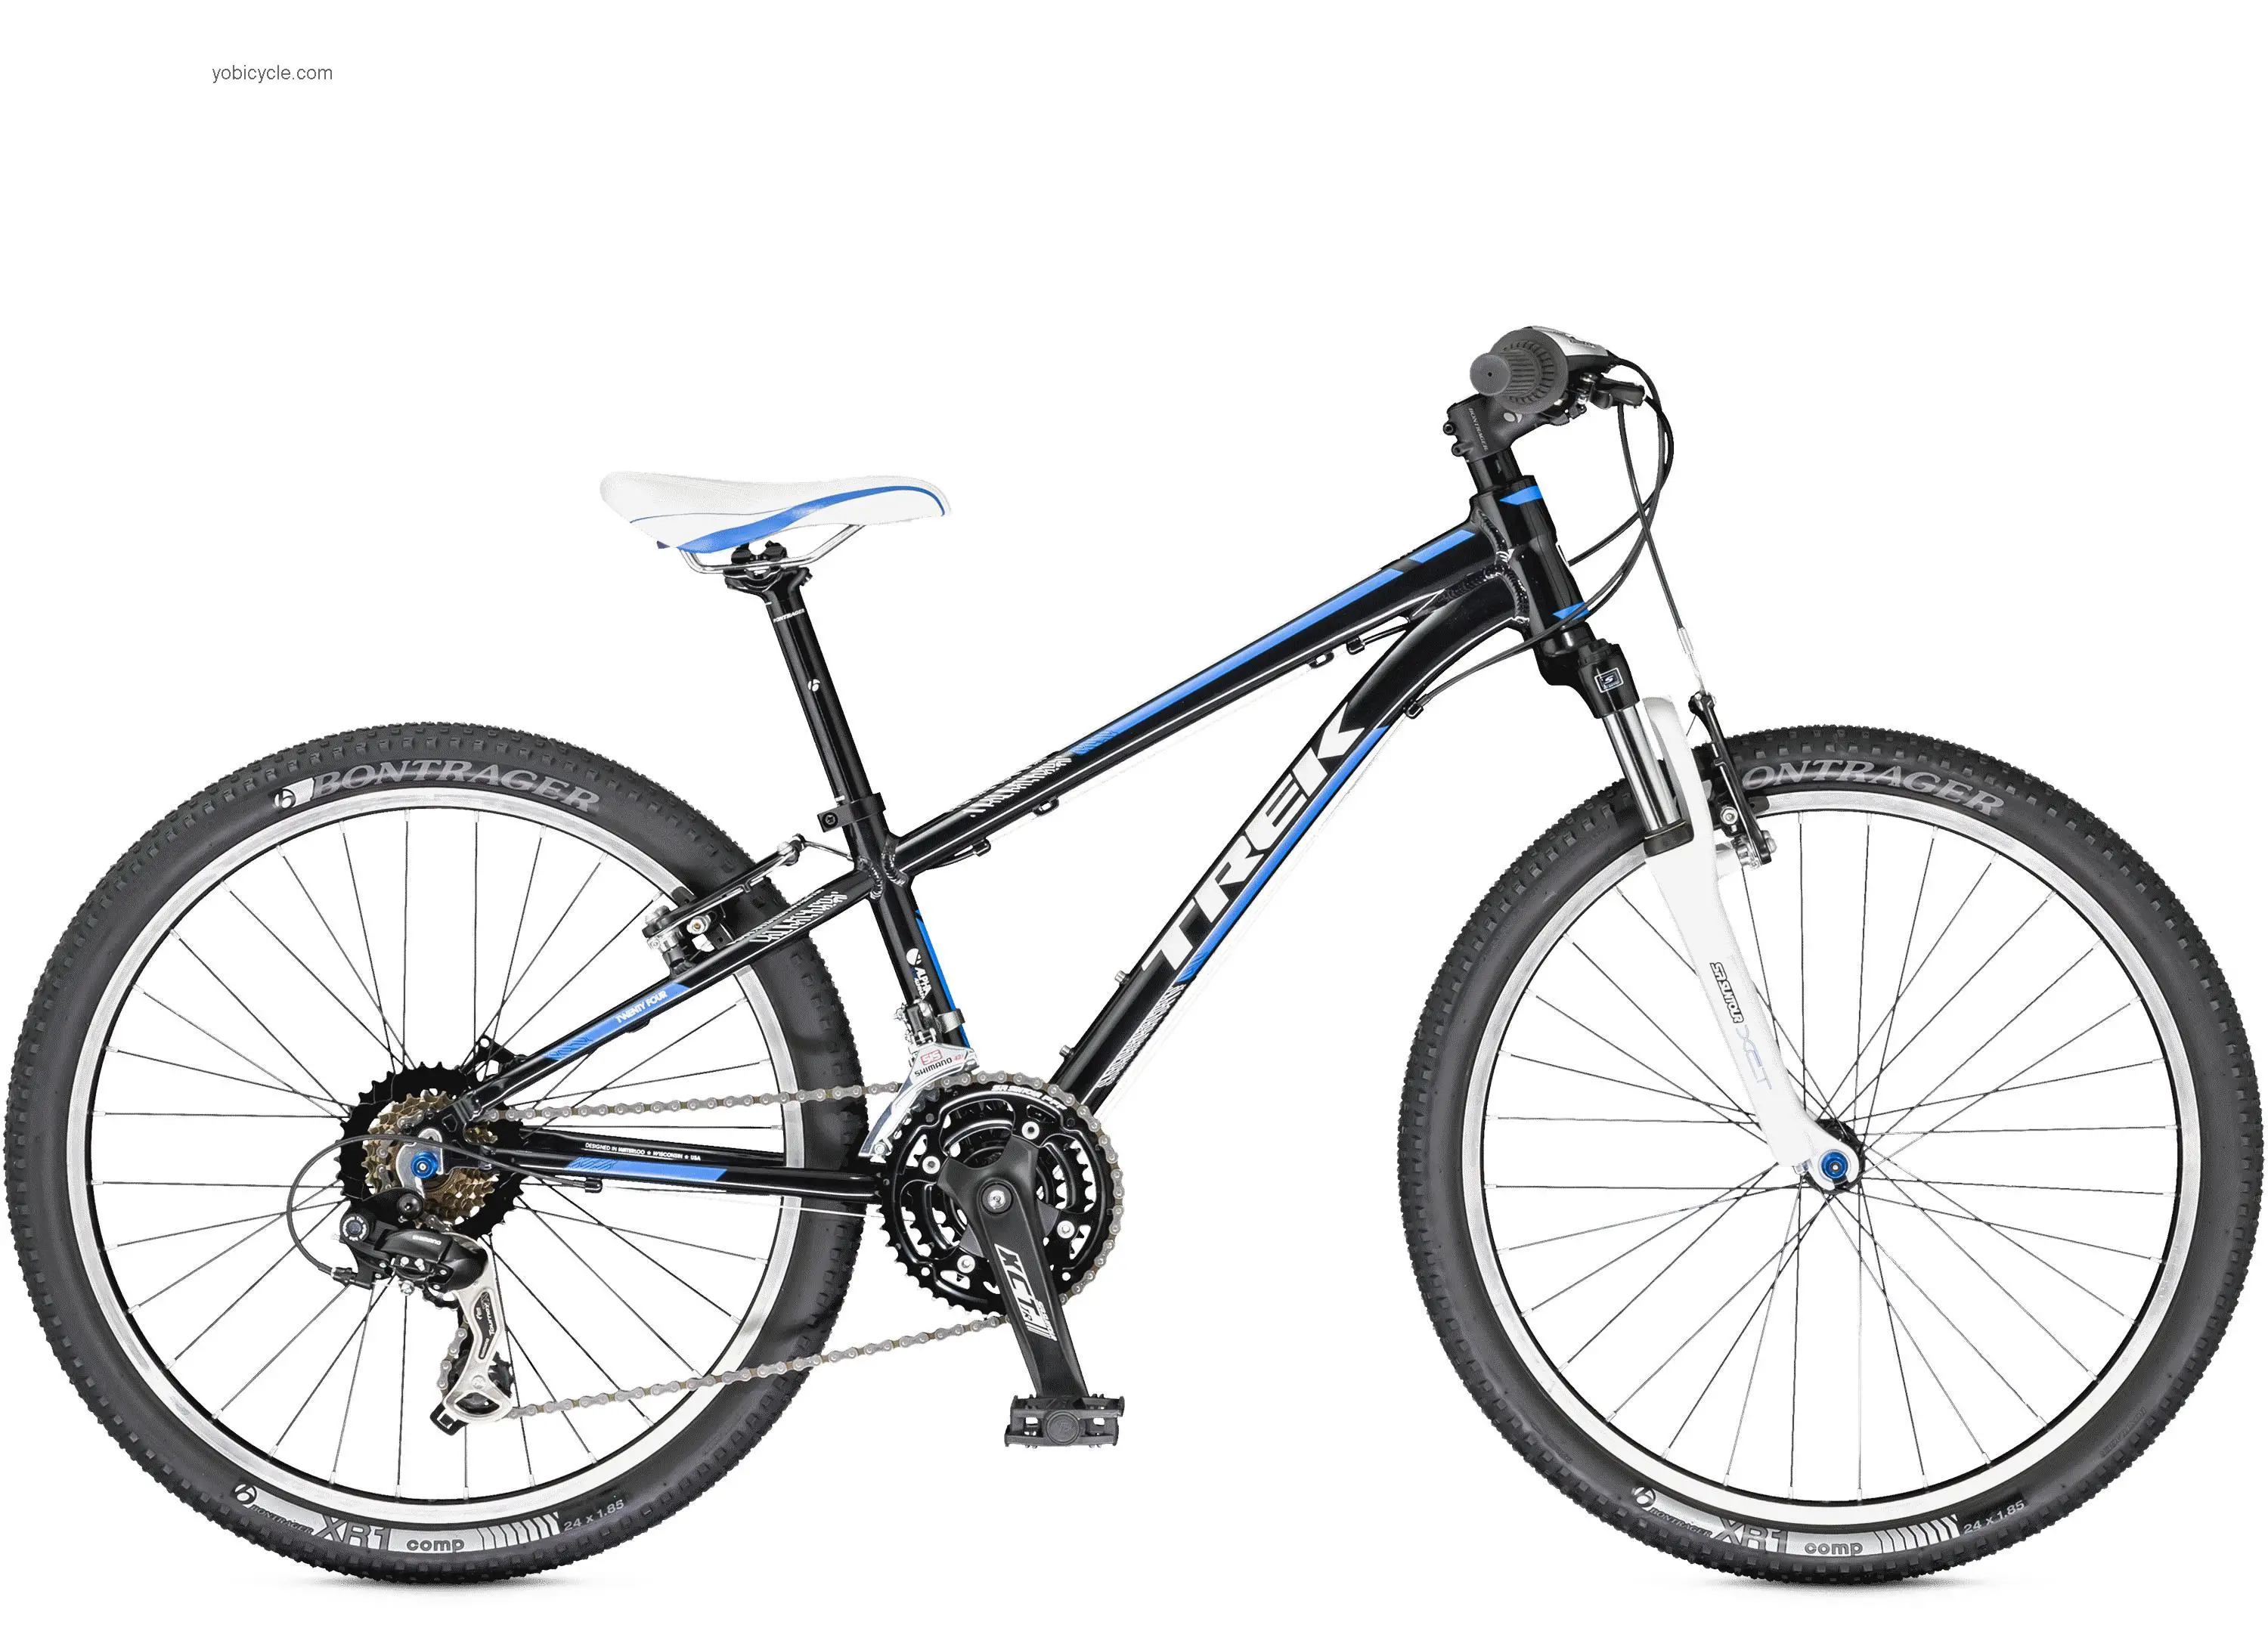 Trek Superfly 24 2015 comparison online with competitors